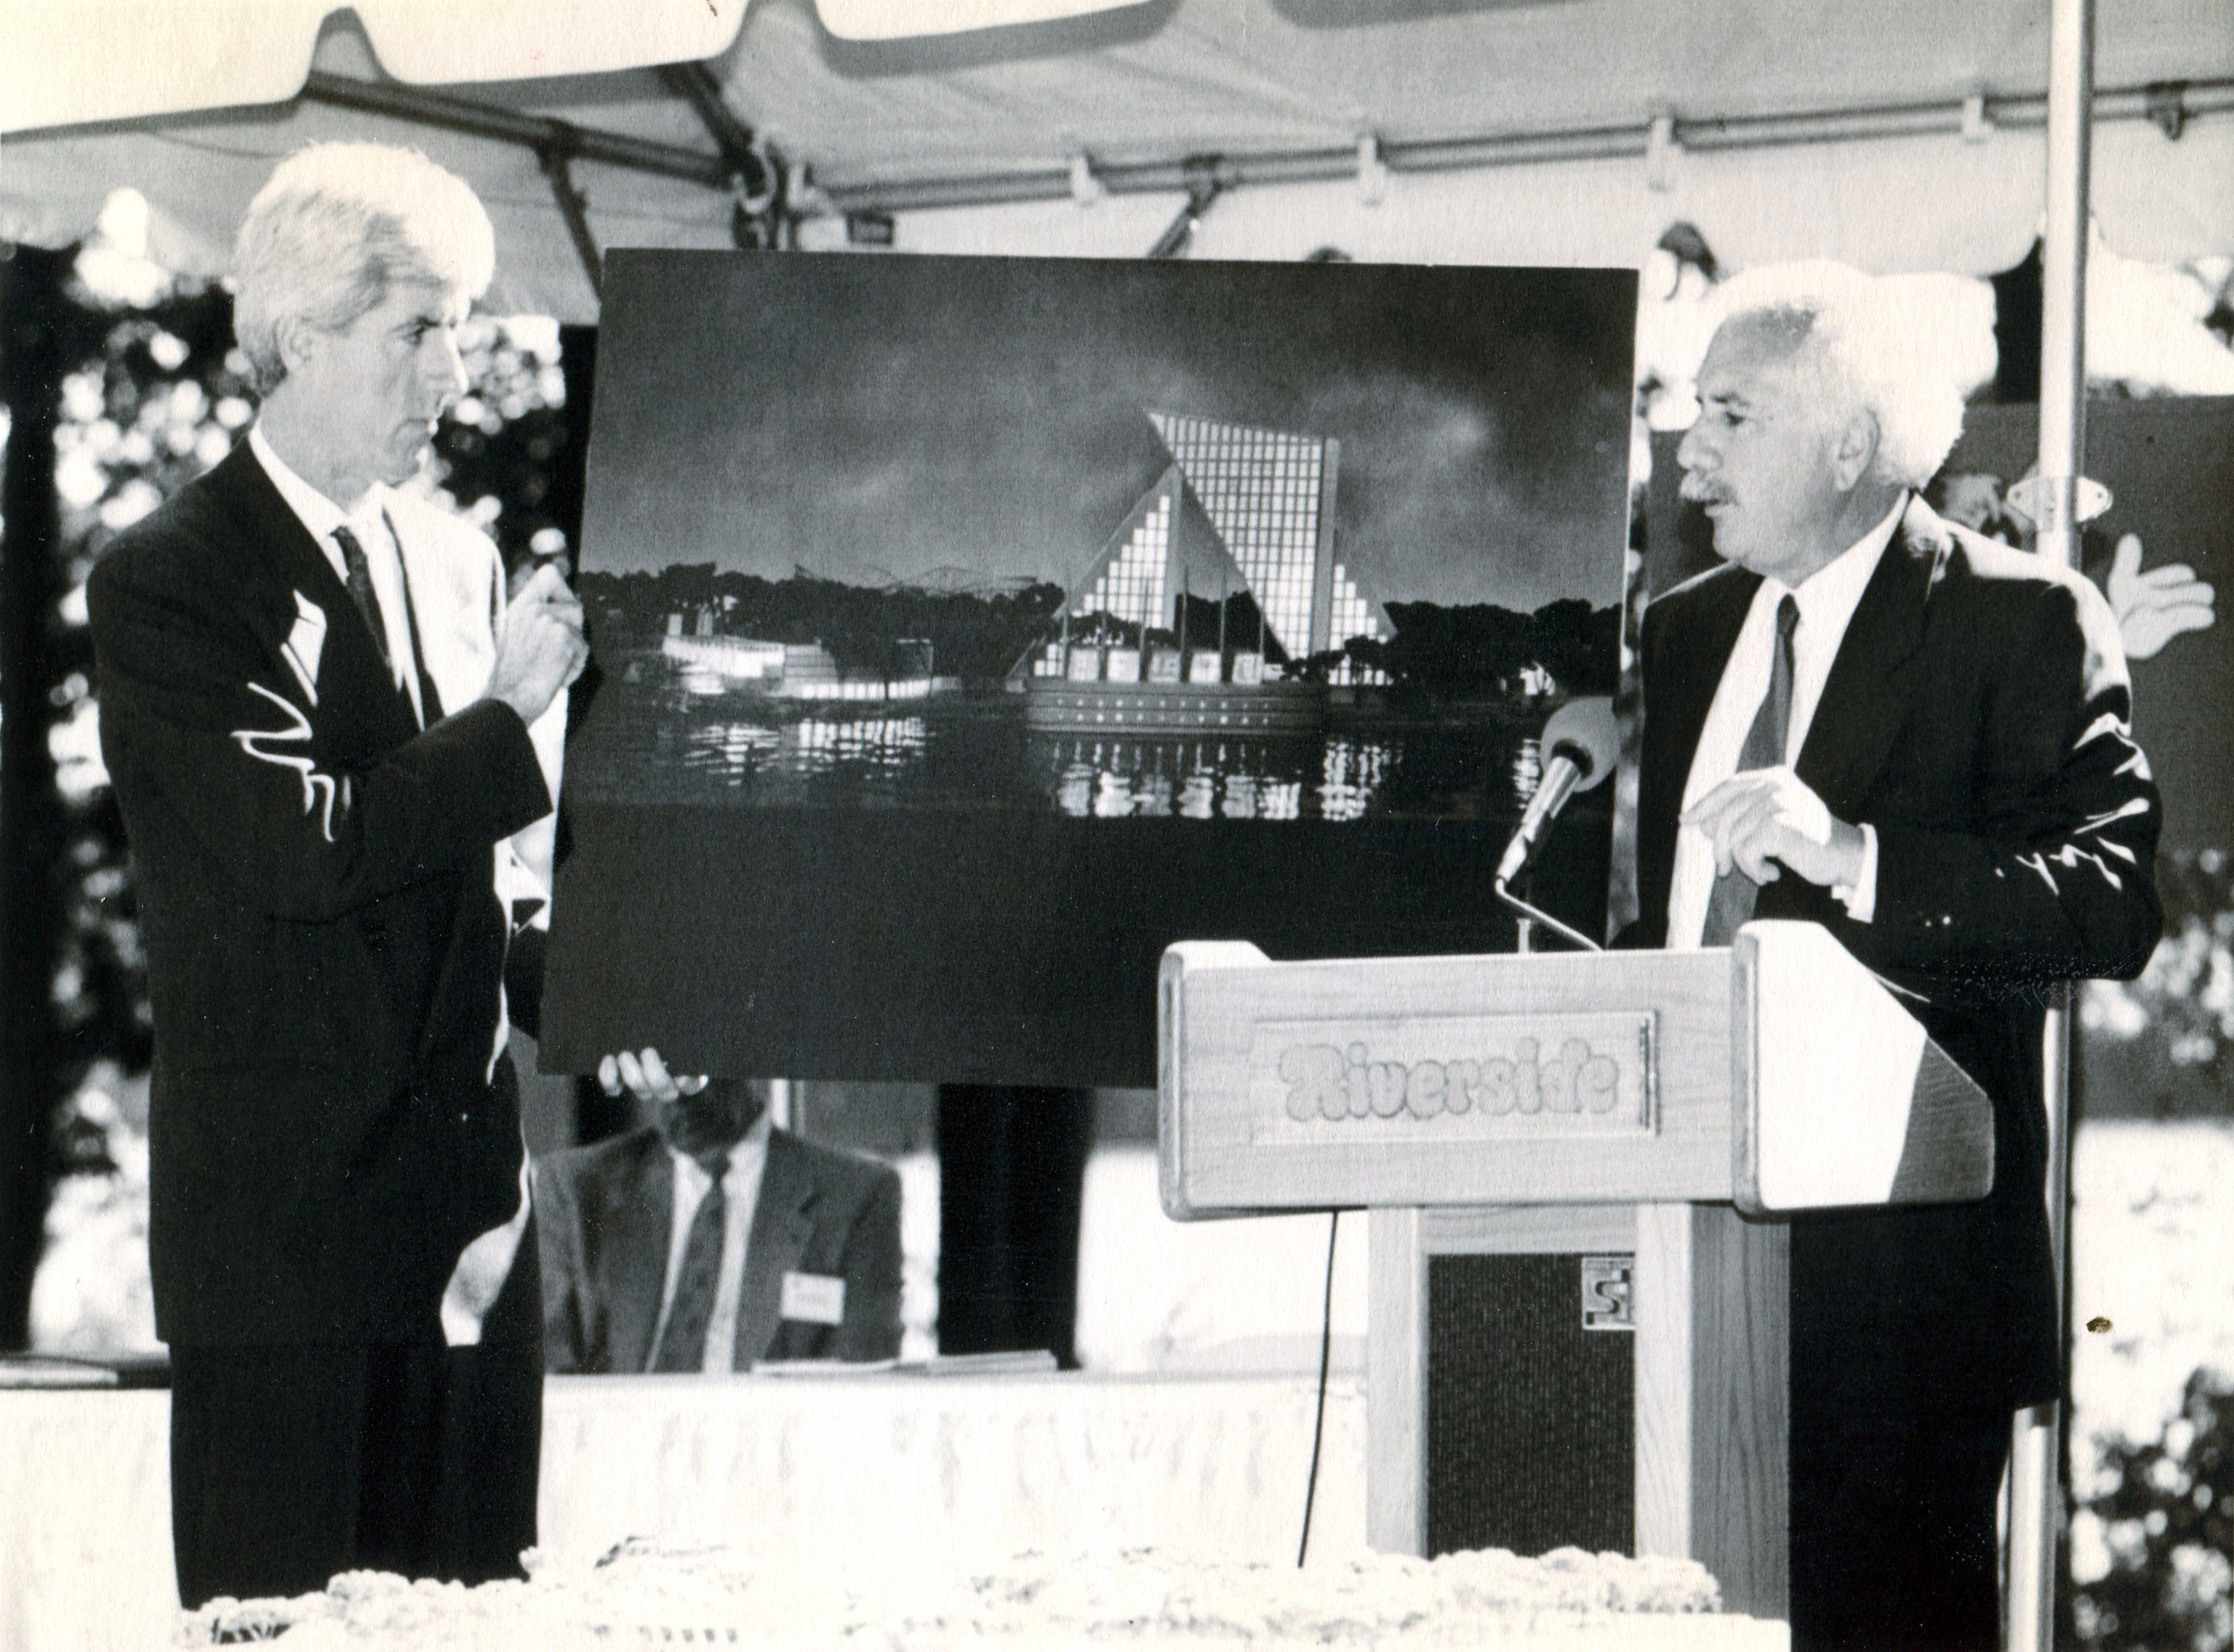 August 23, 1994  - Agawam - Riverside Park owner Ed Carroll, left, and architect Moshe Safdie display drawings and models of a proposed casino at the park. (Republican file photo) Staff-Shot